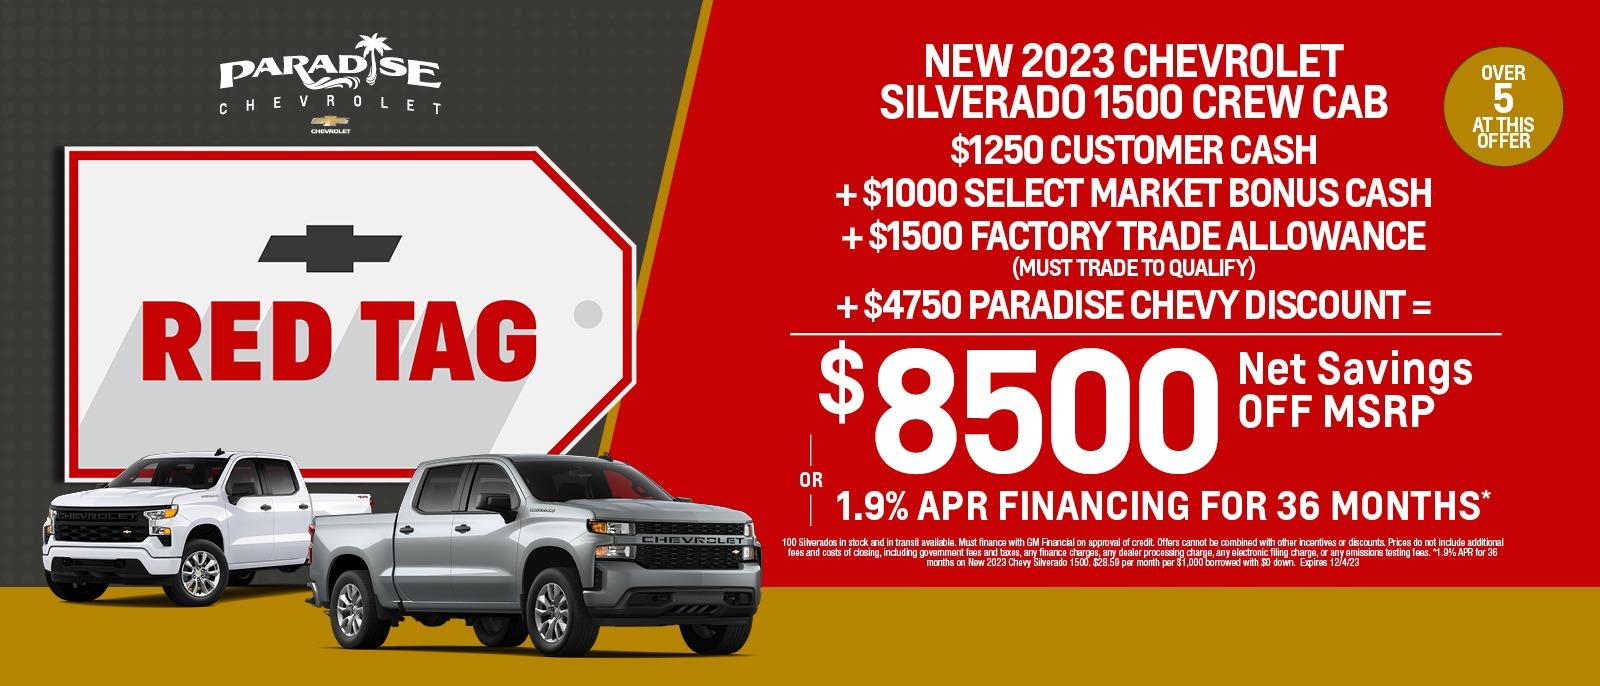 Up to $8500 Off MSRP on 2023 Chevy Silverado 1500s In stock at Paradise